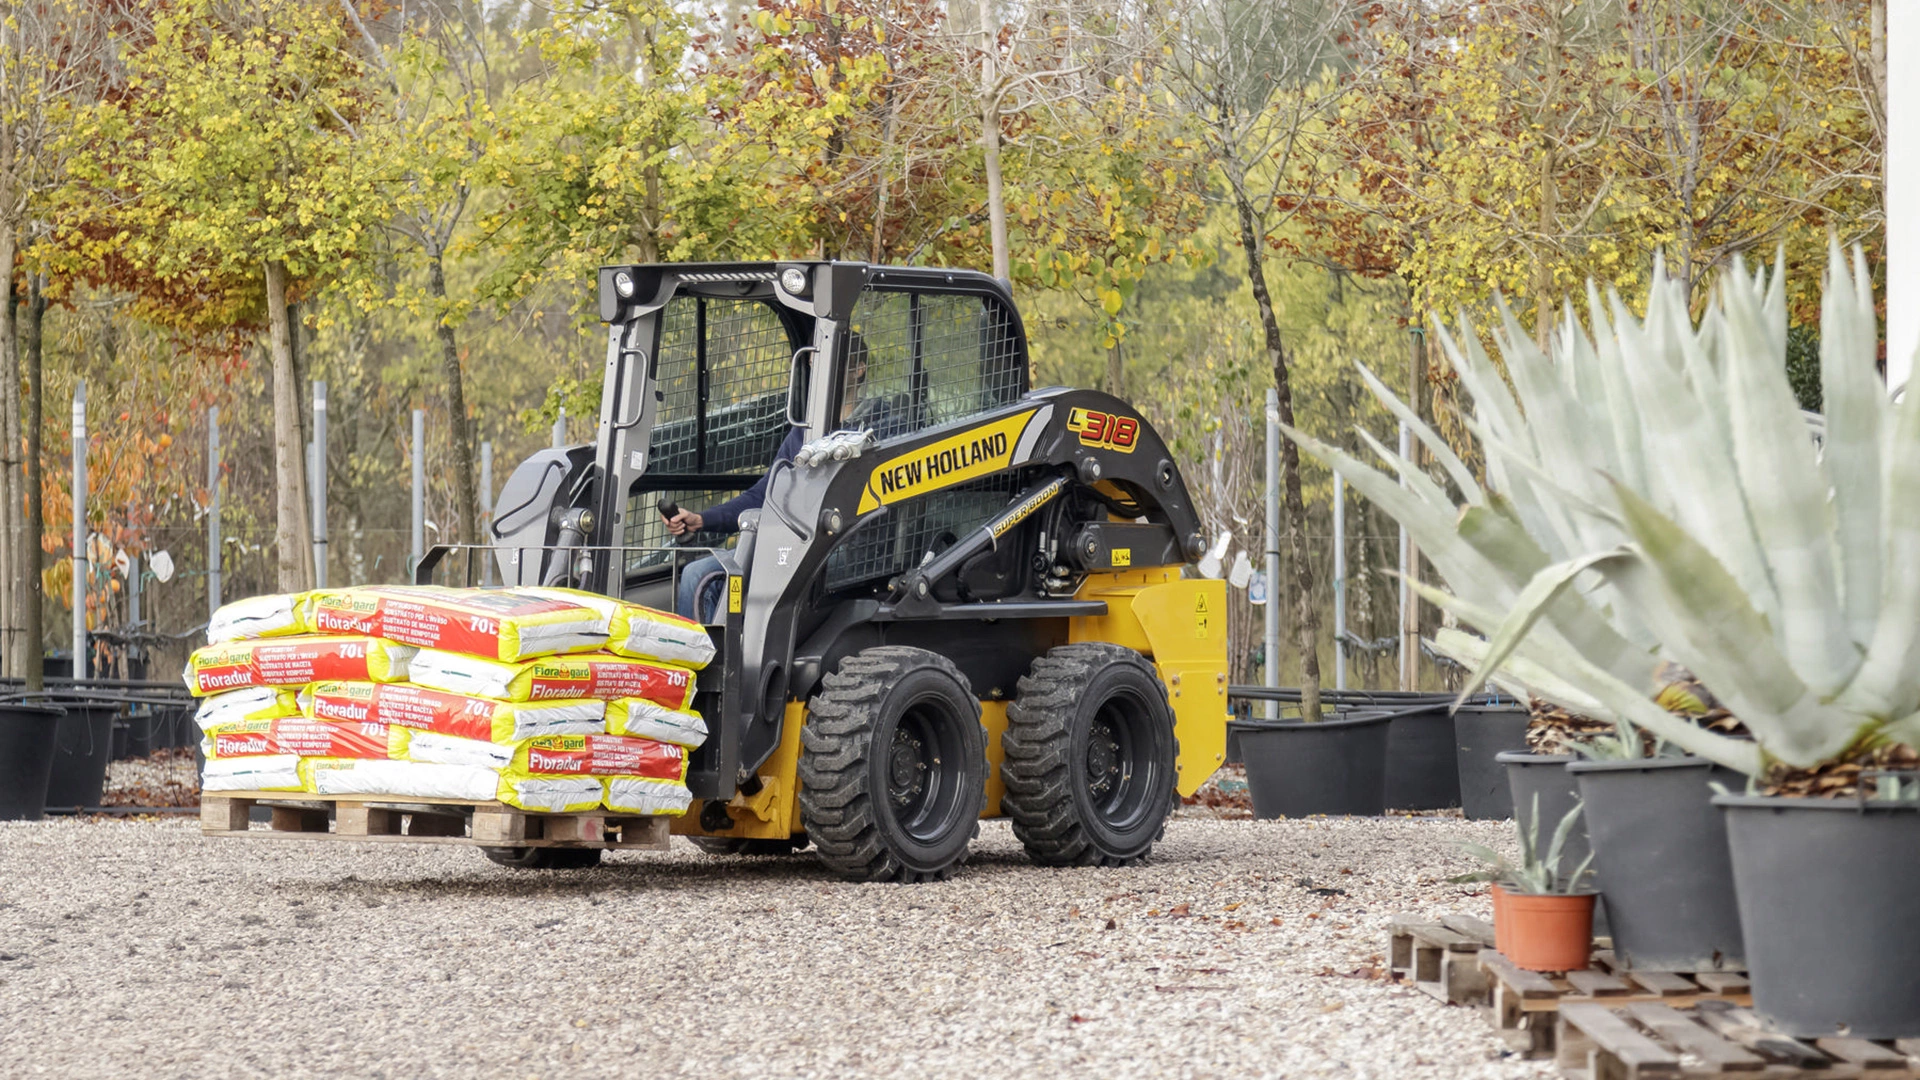 A New Holland skid steer loader in a garden setting, lifting a pallet of soil bags. 